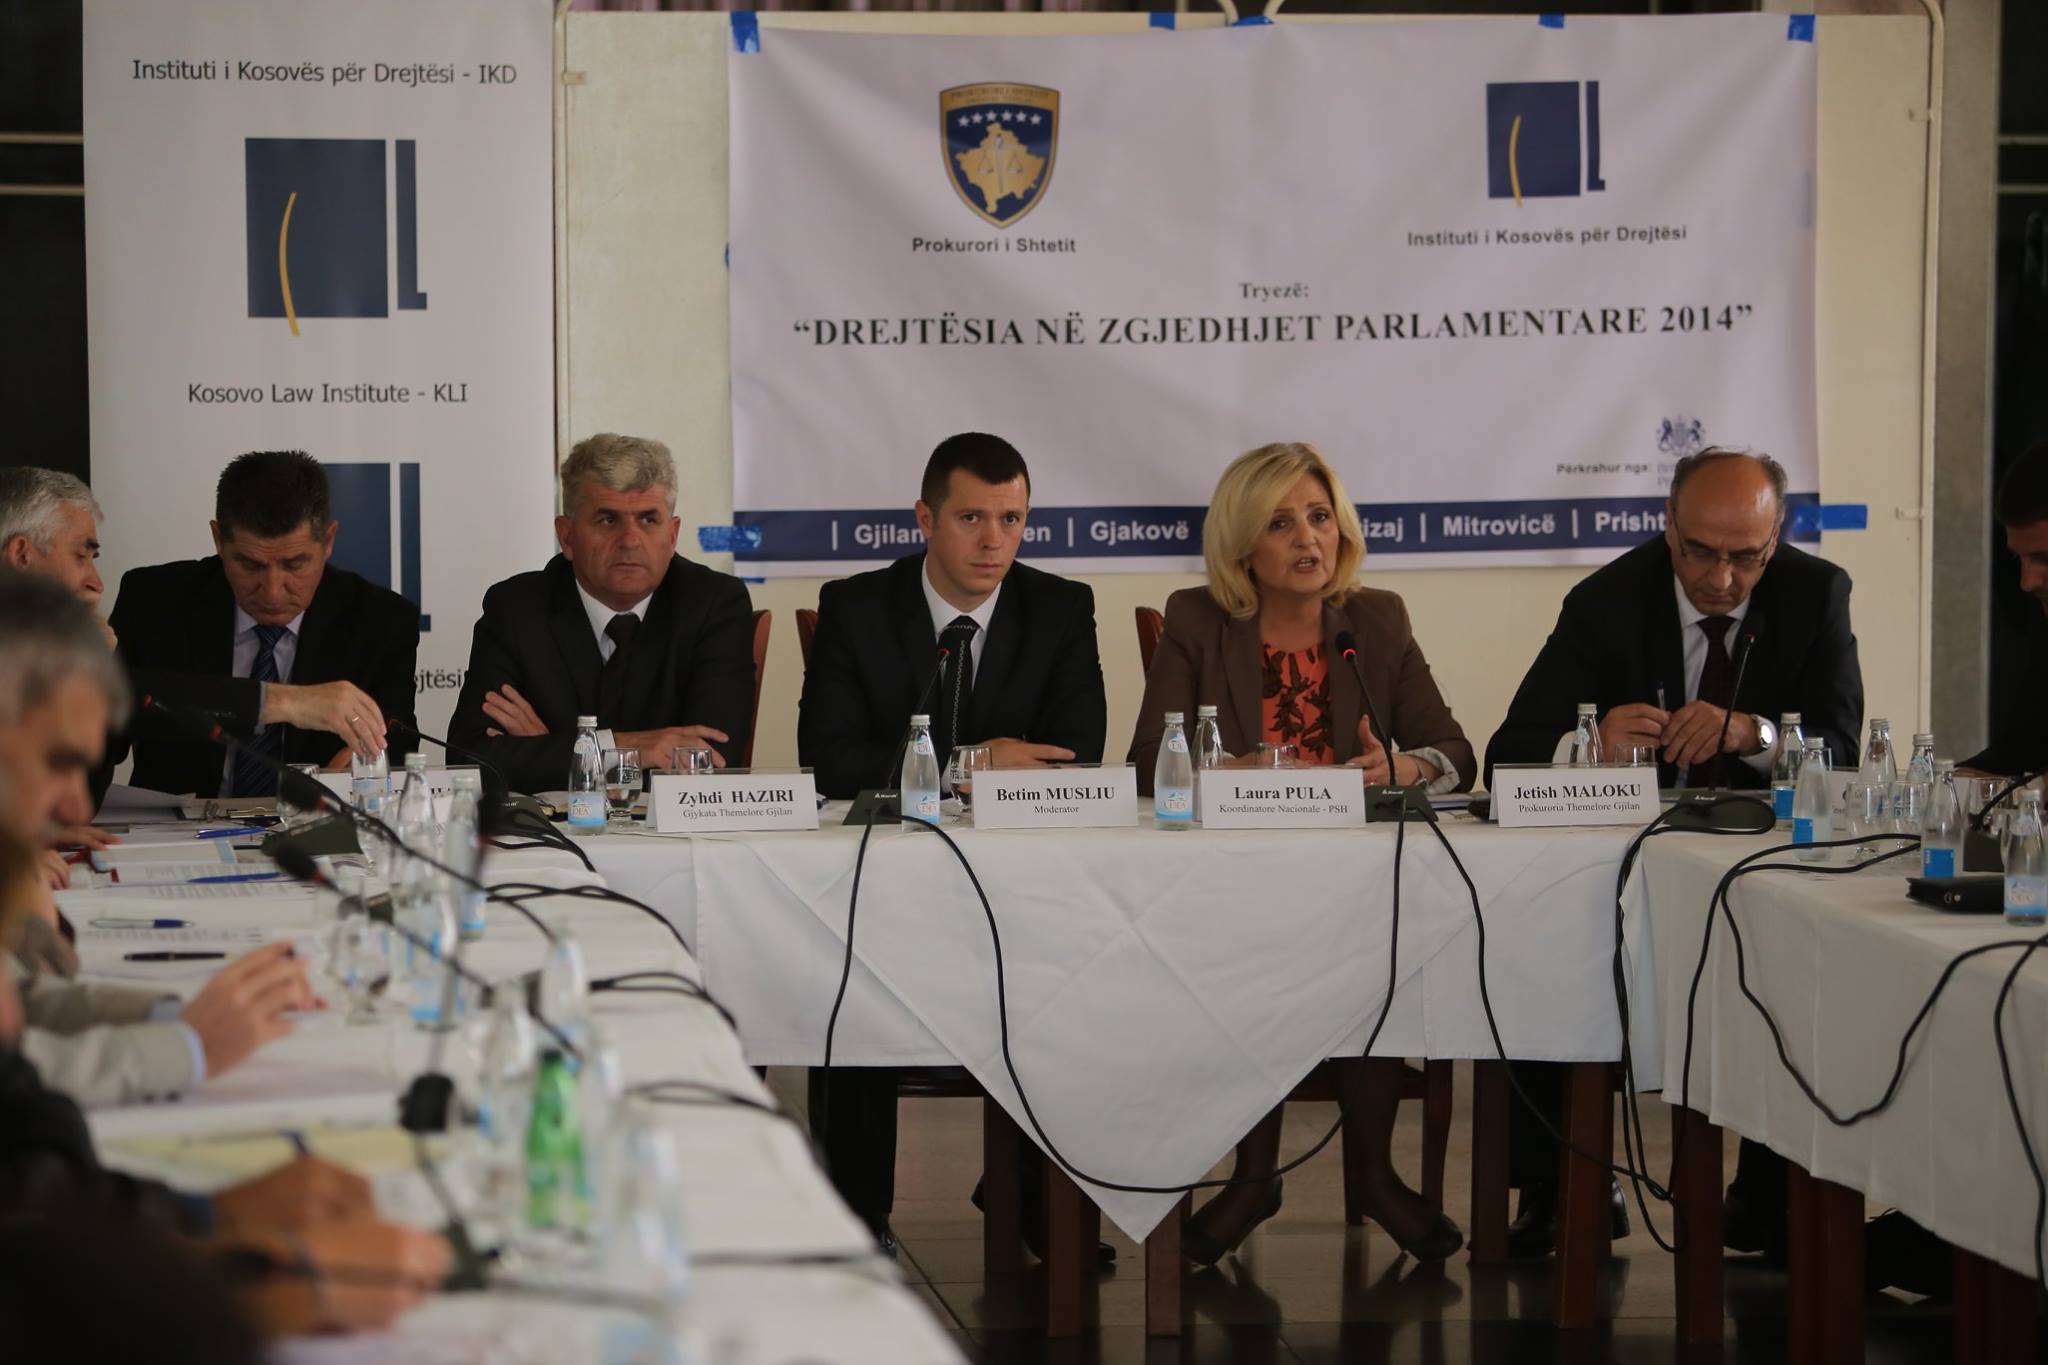 JUSTICE IN GILAN FOR PARLIAMENTARY ELECTIONS 2014